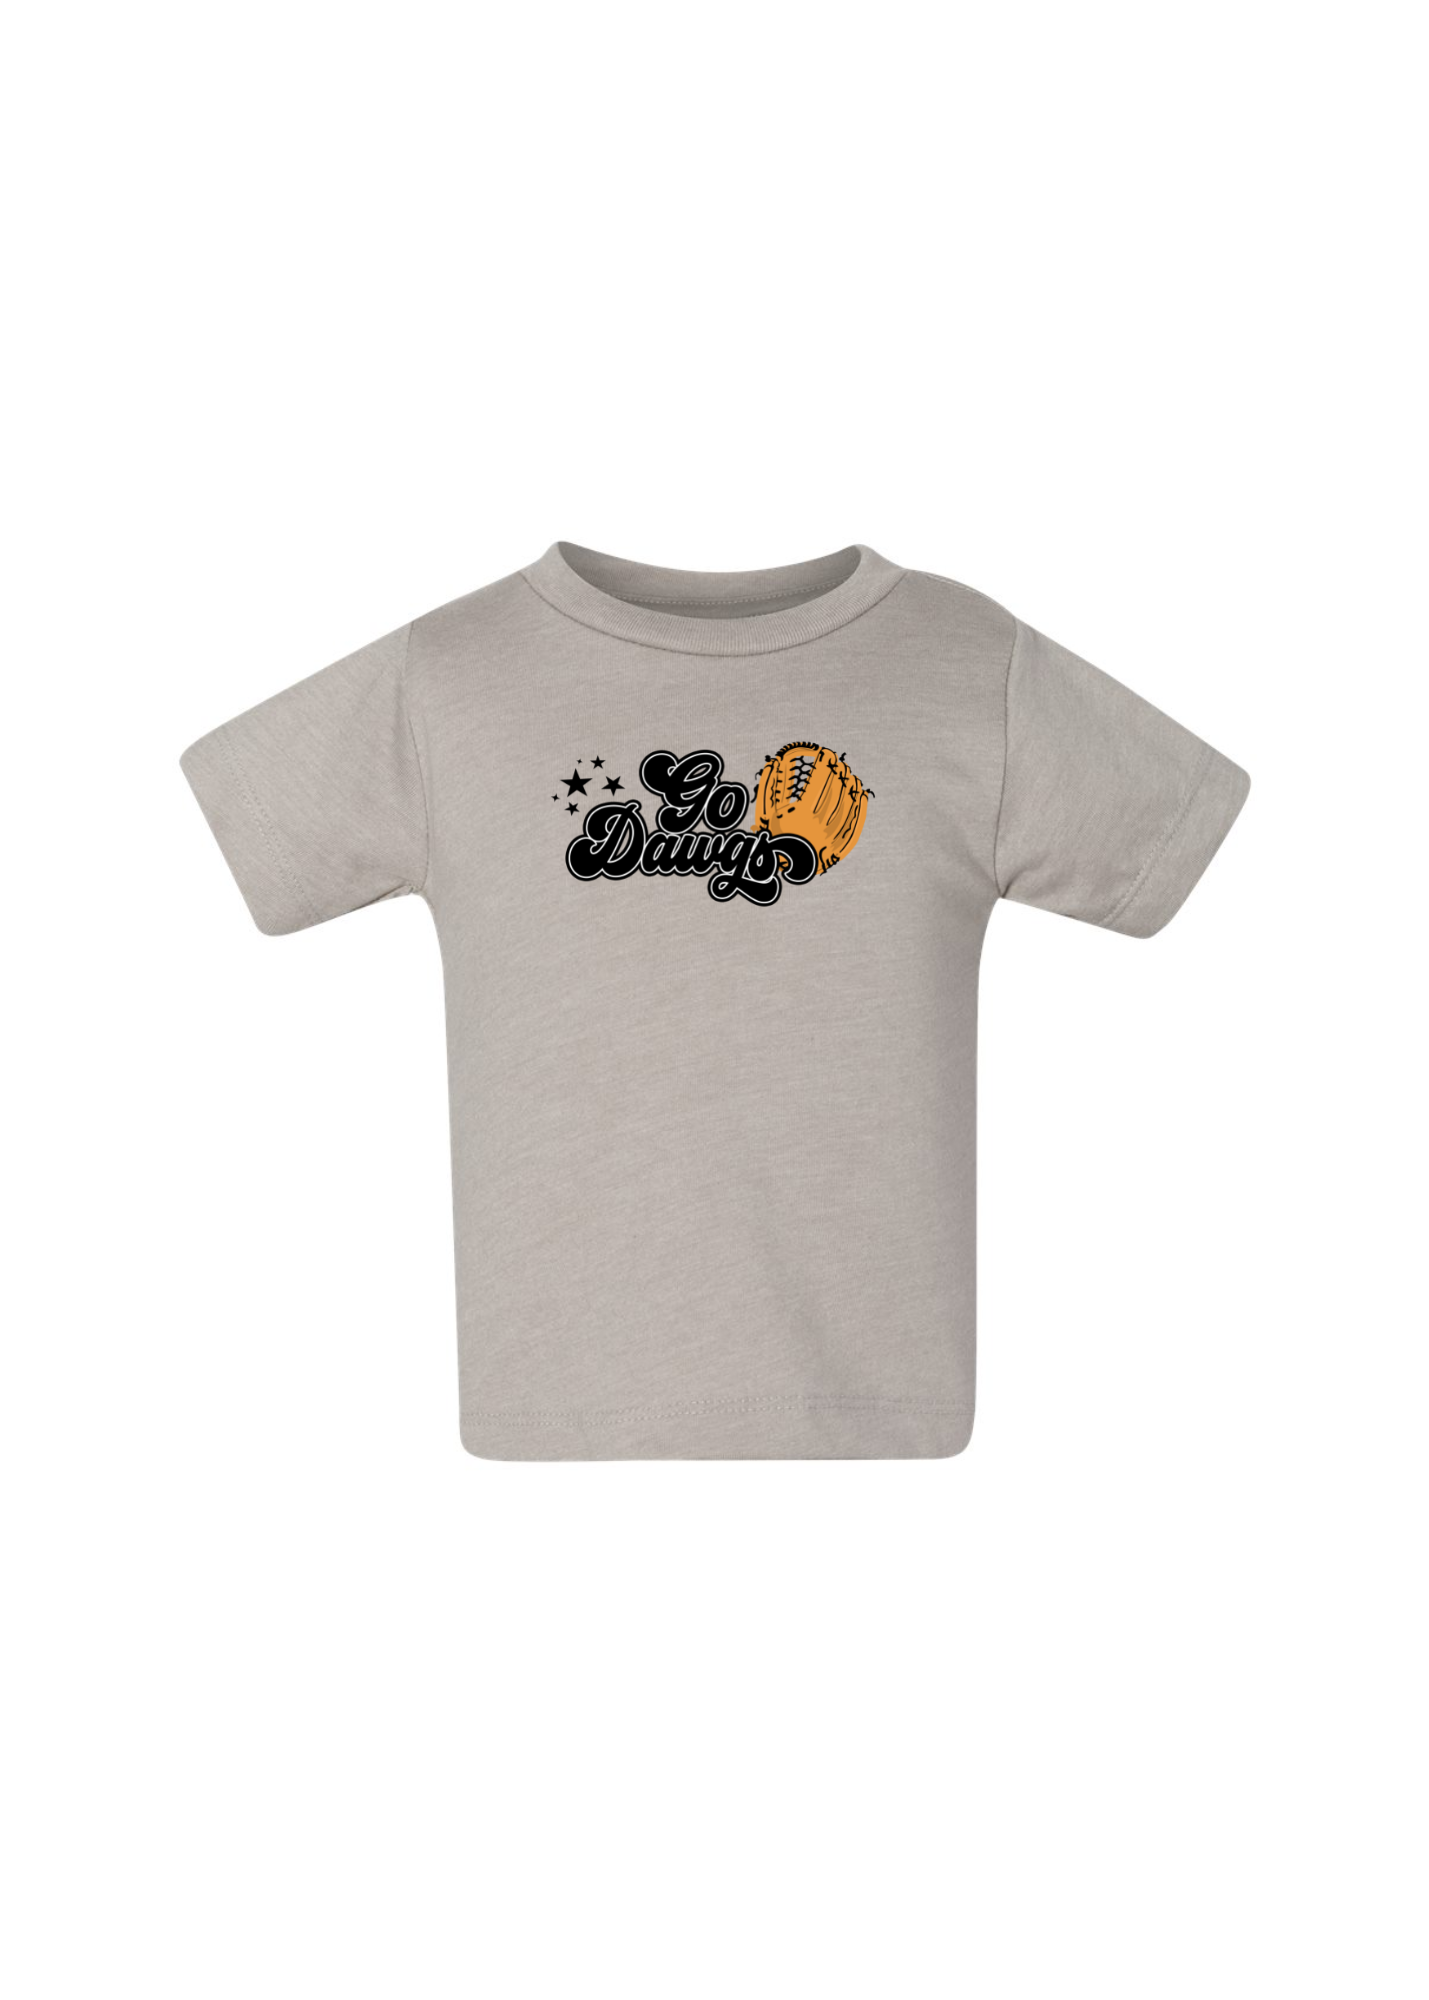 Diamond Dawgs | Baby Tee-Sister Shirts-Sister Shirts, Cute & Custom Tees for Mama & Littles in Trussville, Alabama.